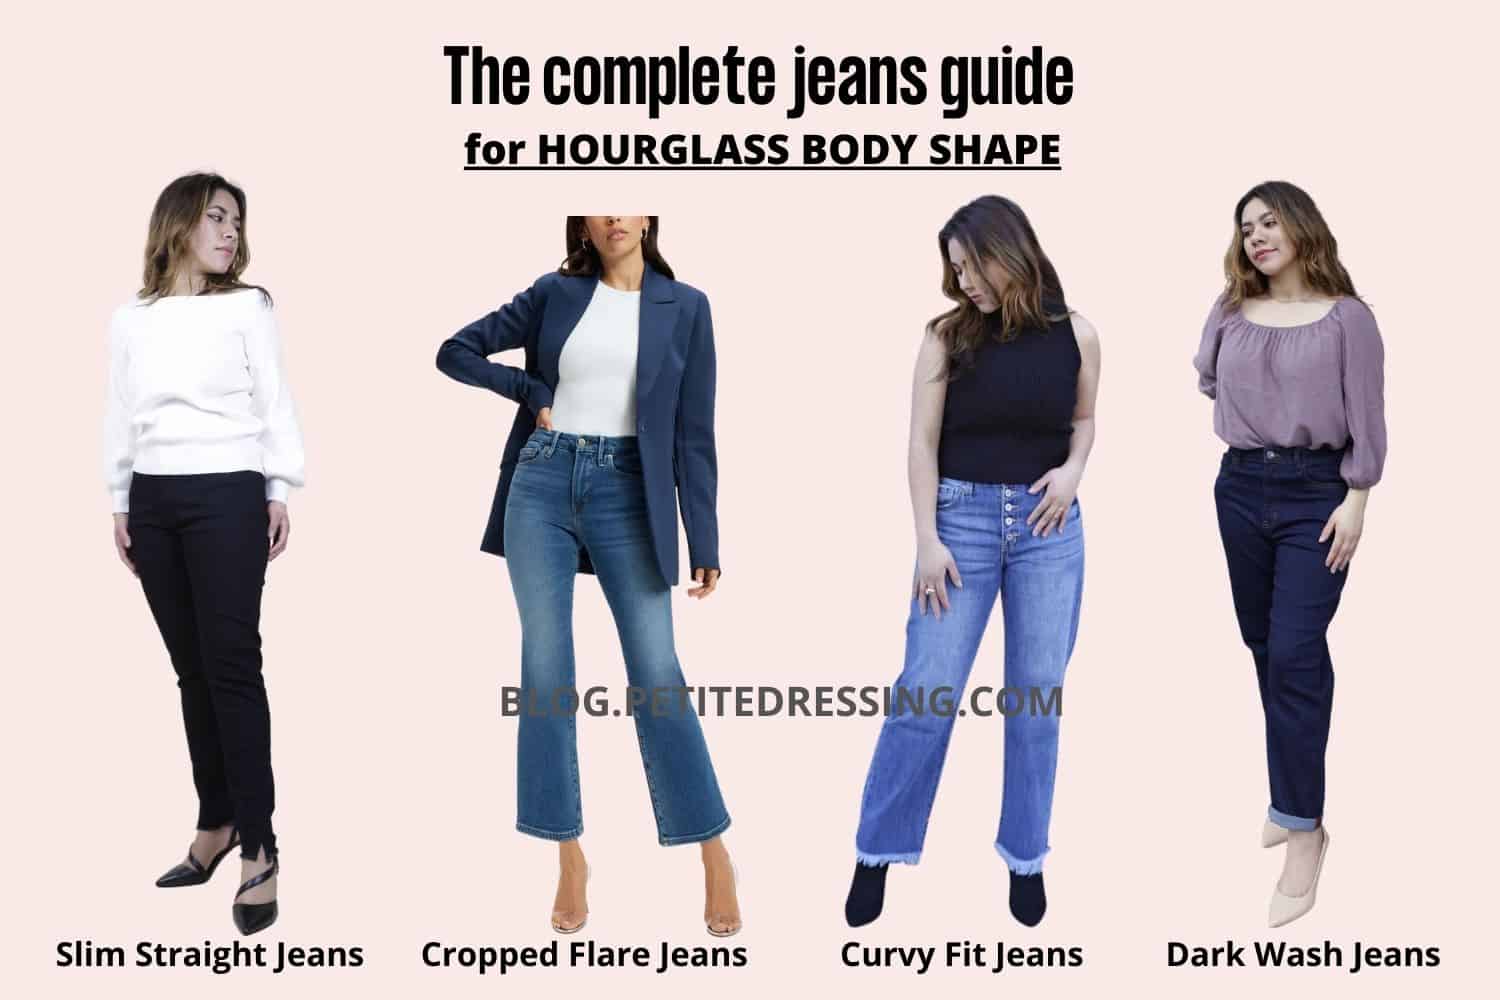 hensigt sjæl auditorium The Complete Jeans Guide for An Hourglass Figure